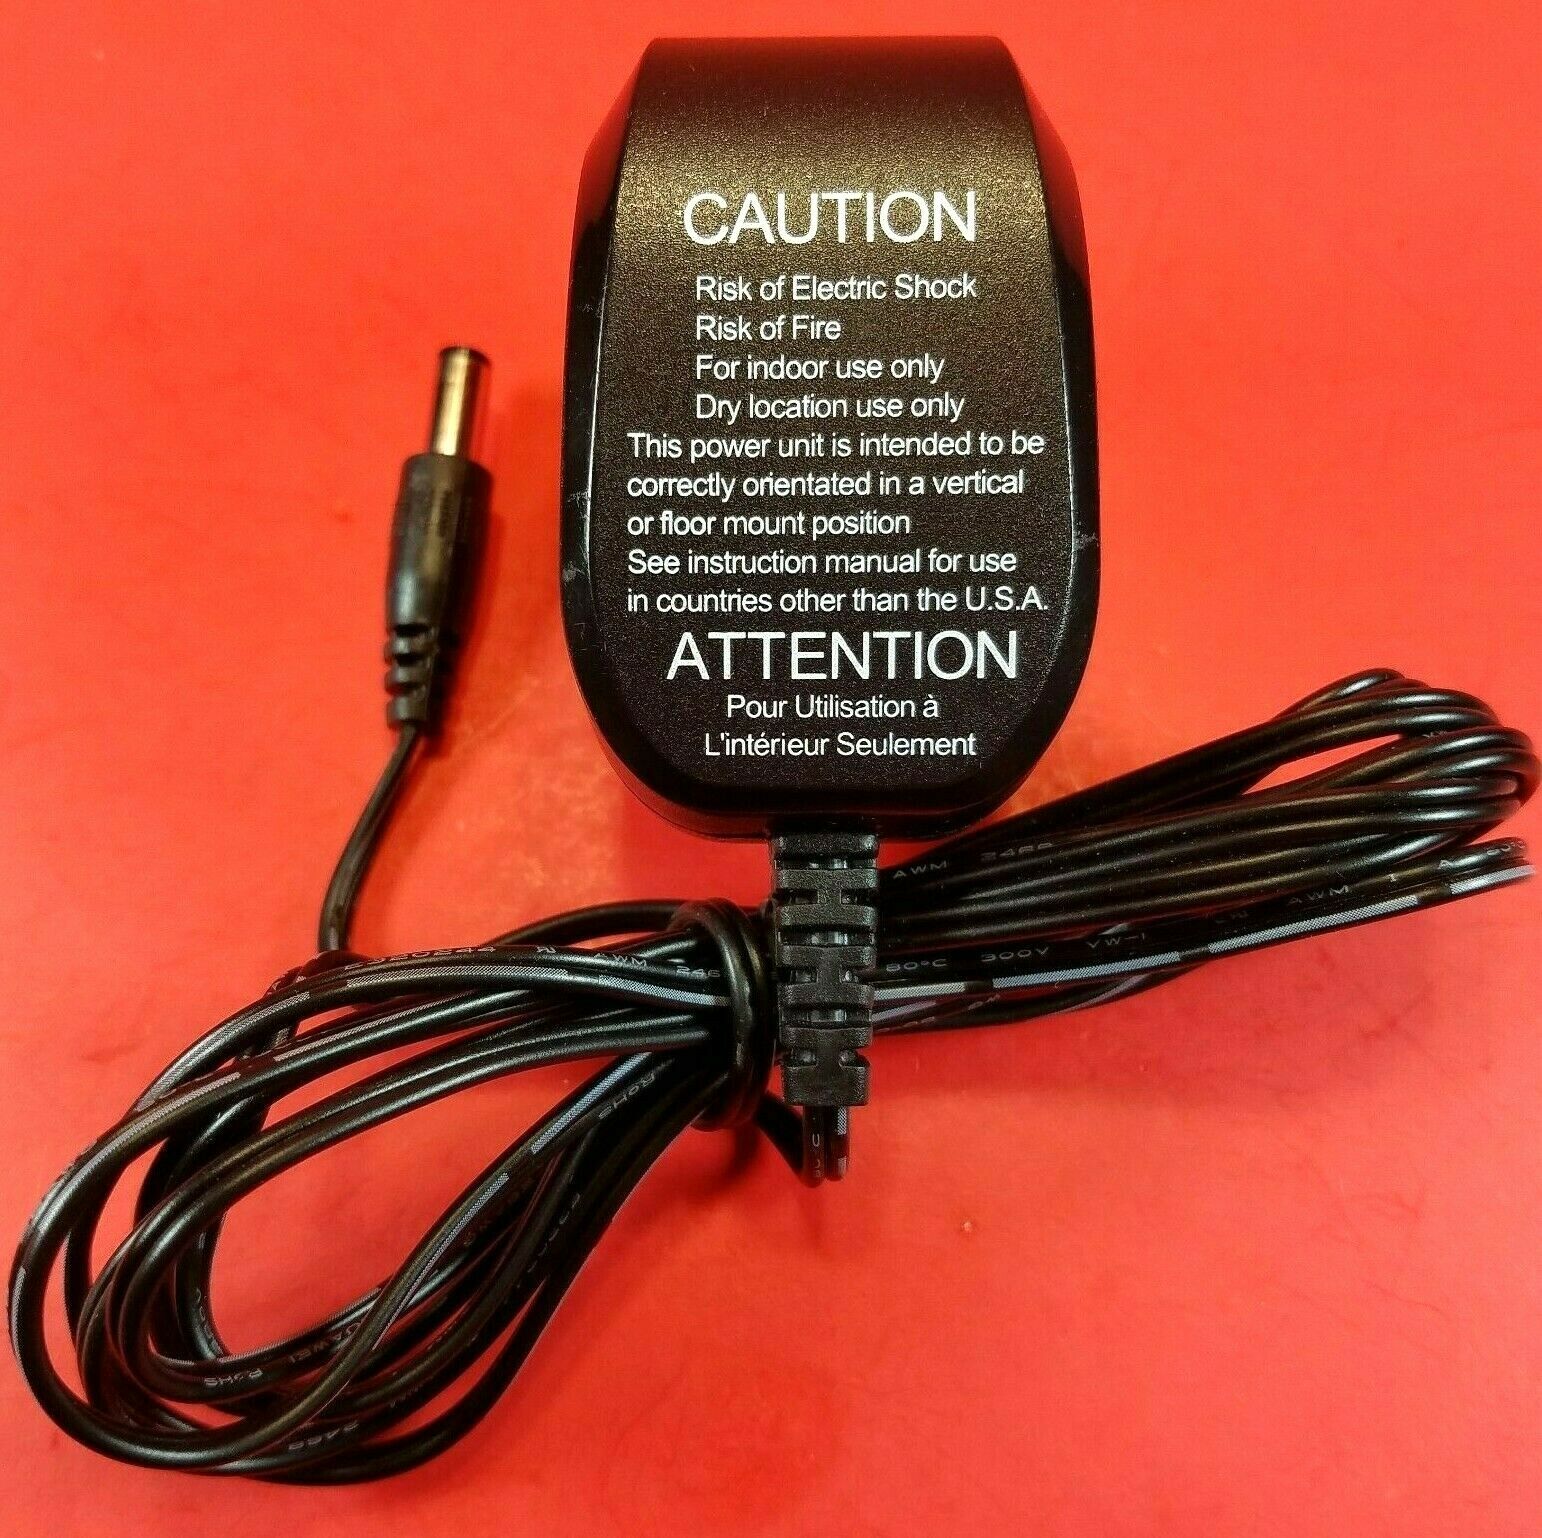 Model: YLJXA-T060008 Power Supply Adaptor 6.0V - 80mA OEM AC/DC Adapter Charger Type: Class 2 Power Supply Output Volt